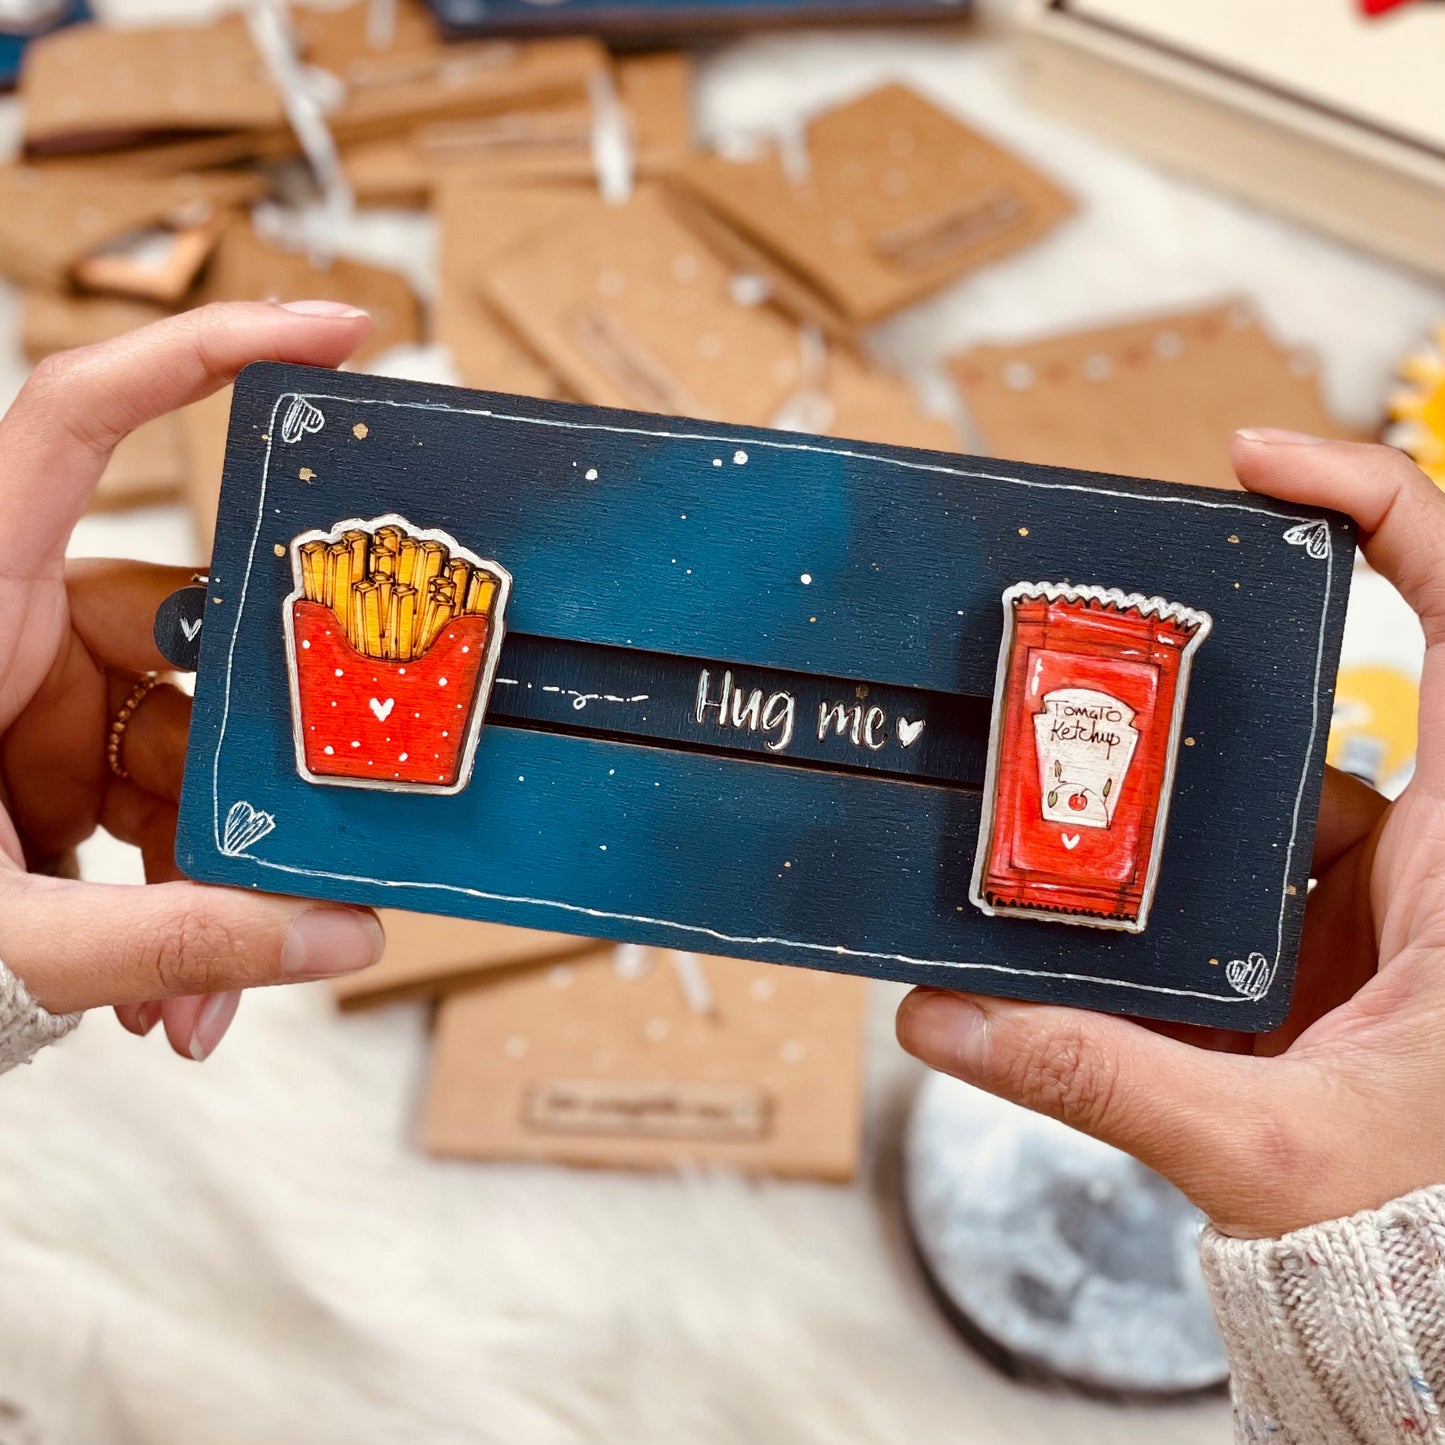 Swipe card "Fries& Ketchup" Valentine's wooden message